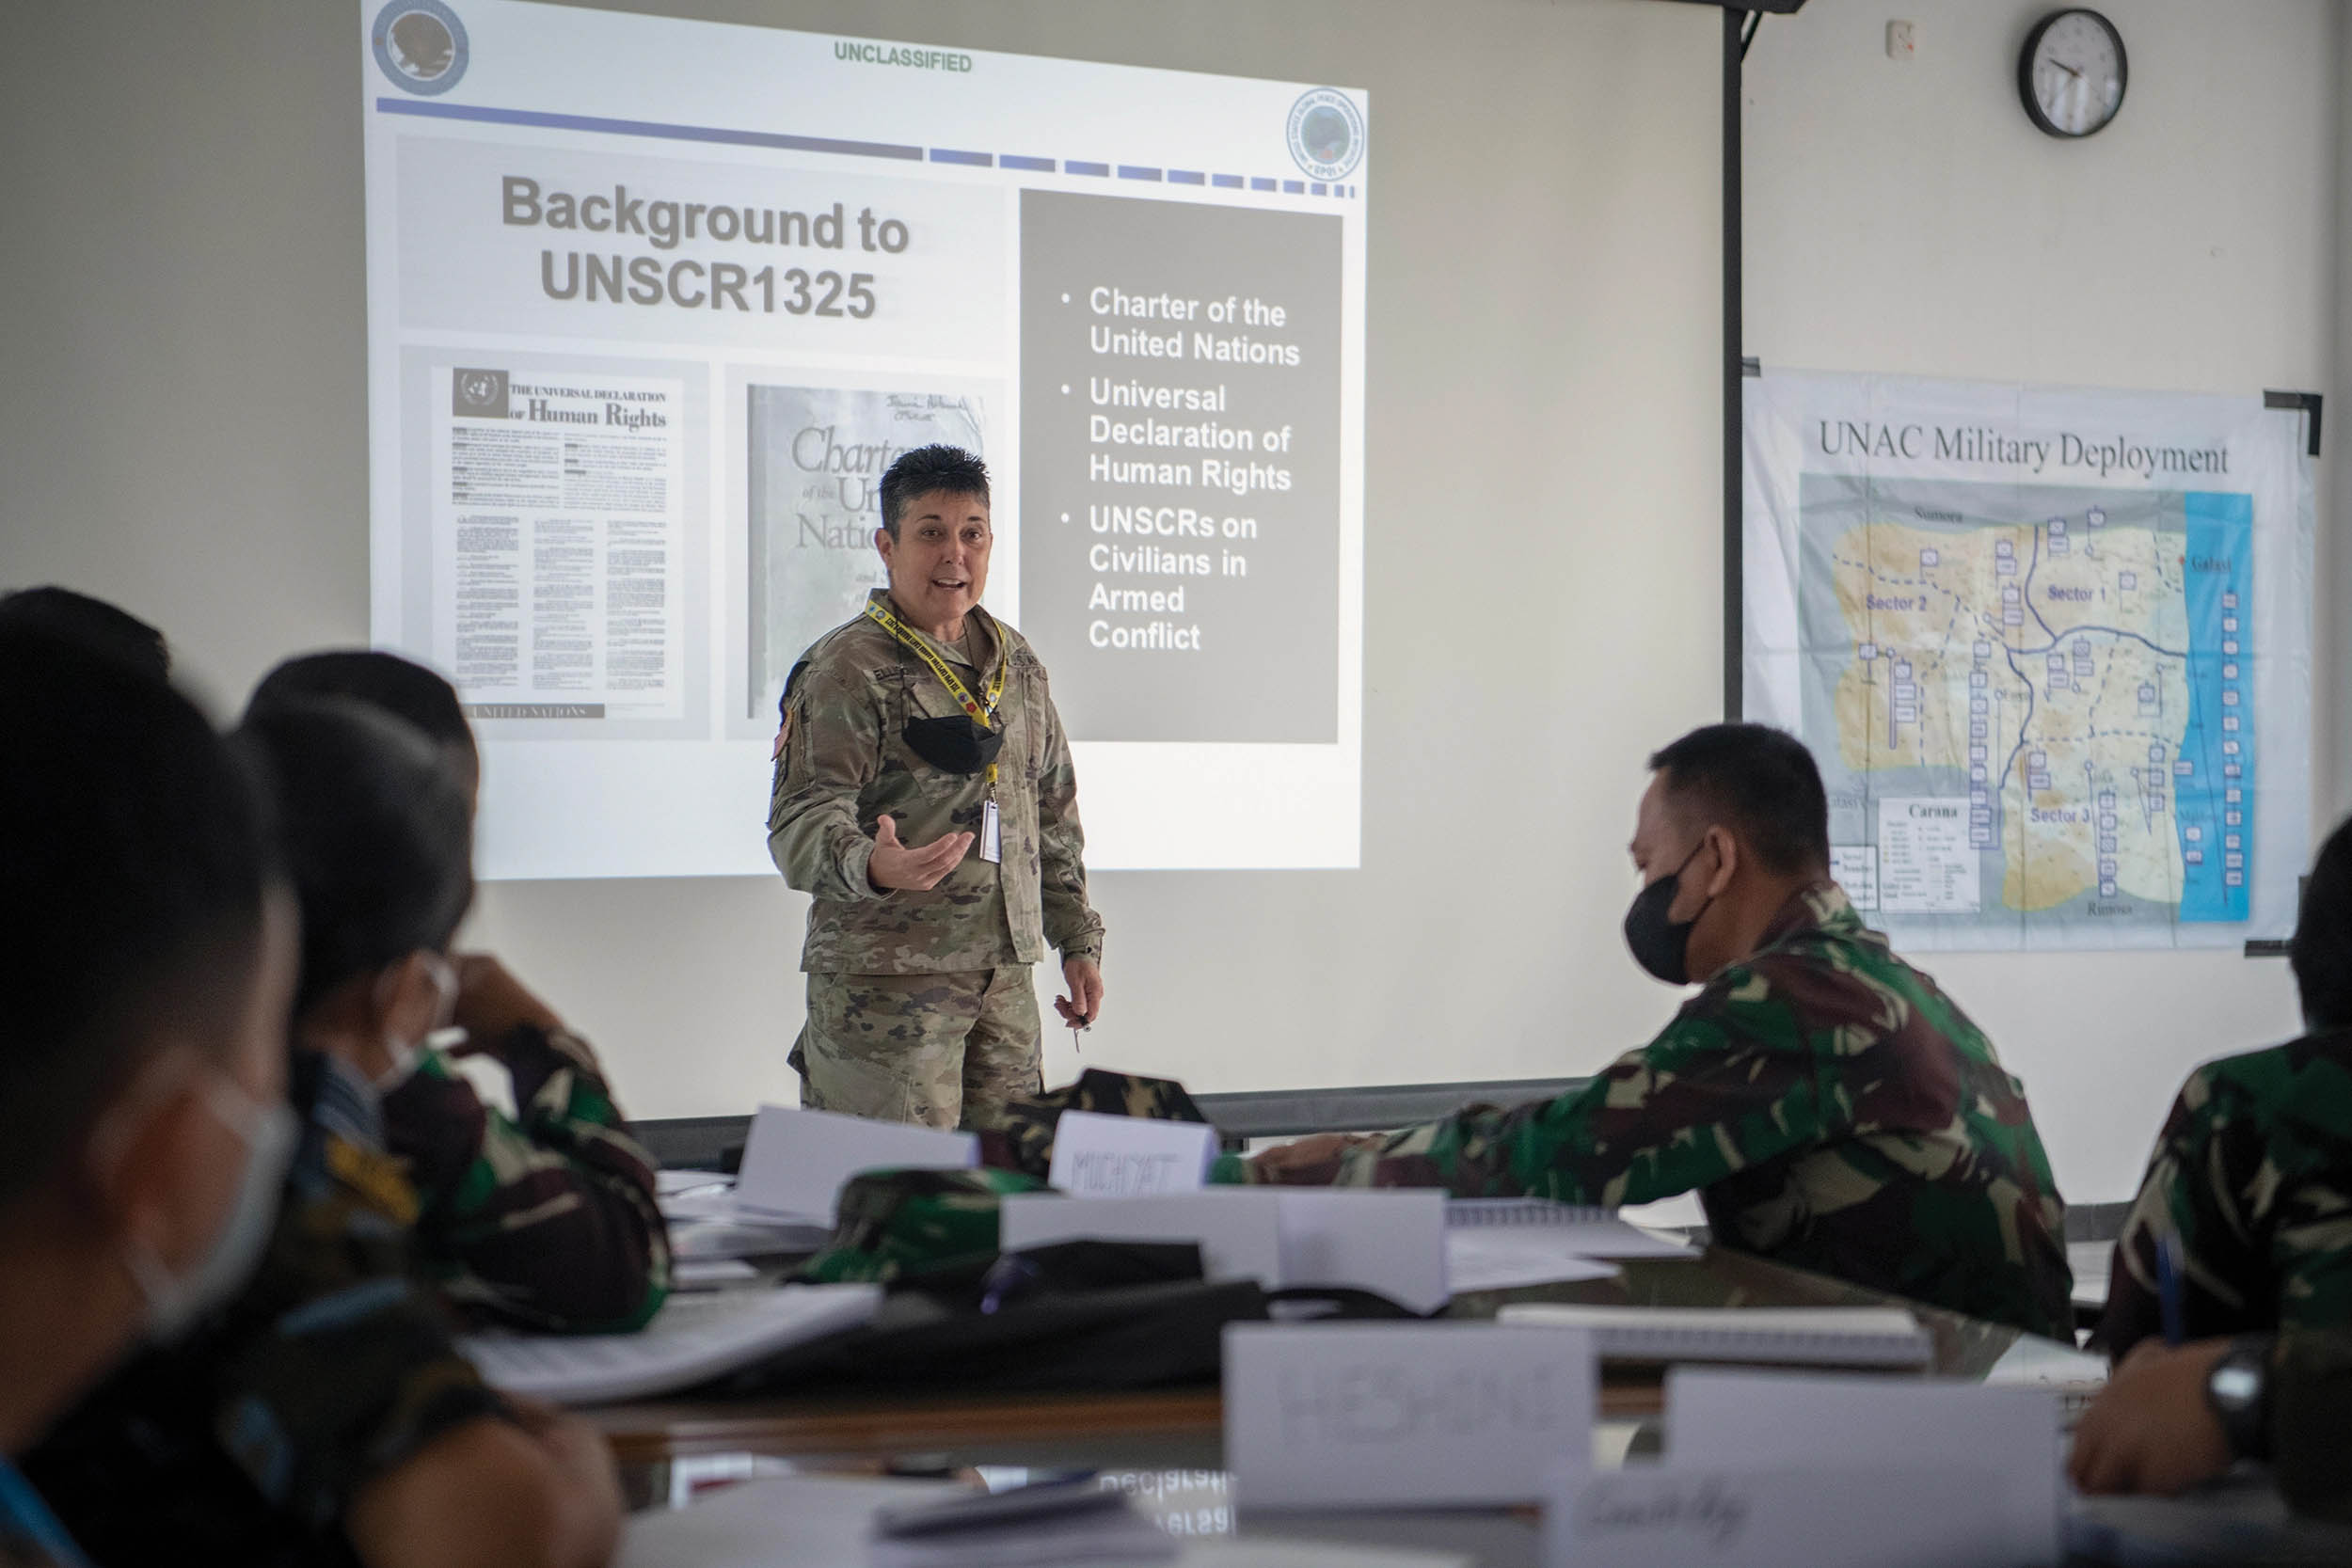 Colonel Pam Ellison with Hawaii Army National Guard speaks to students on Women, Peace, and Security initiatives and integration into peacekeeping operations, in Pusat Misi Pemeliharaan, Indonesia, July 19, 2022 (U.S. Marine Corps/John Hall)